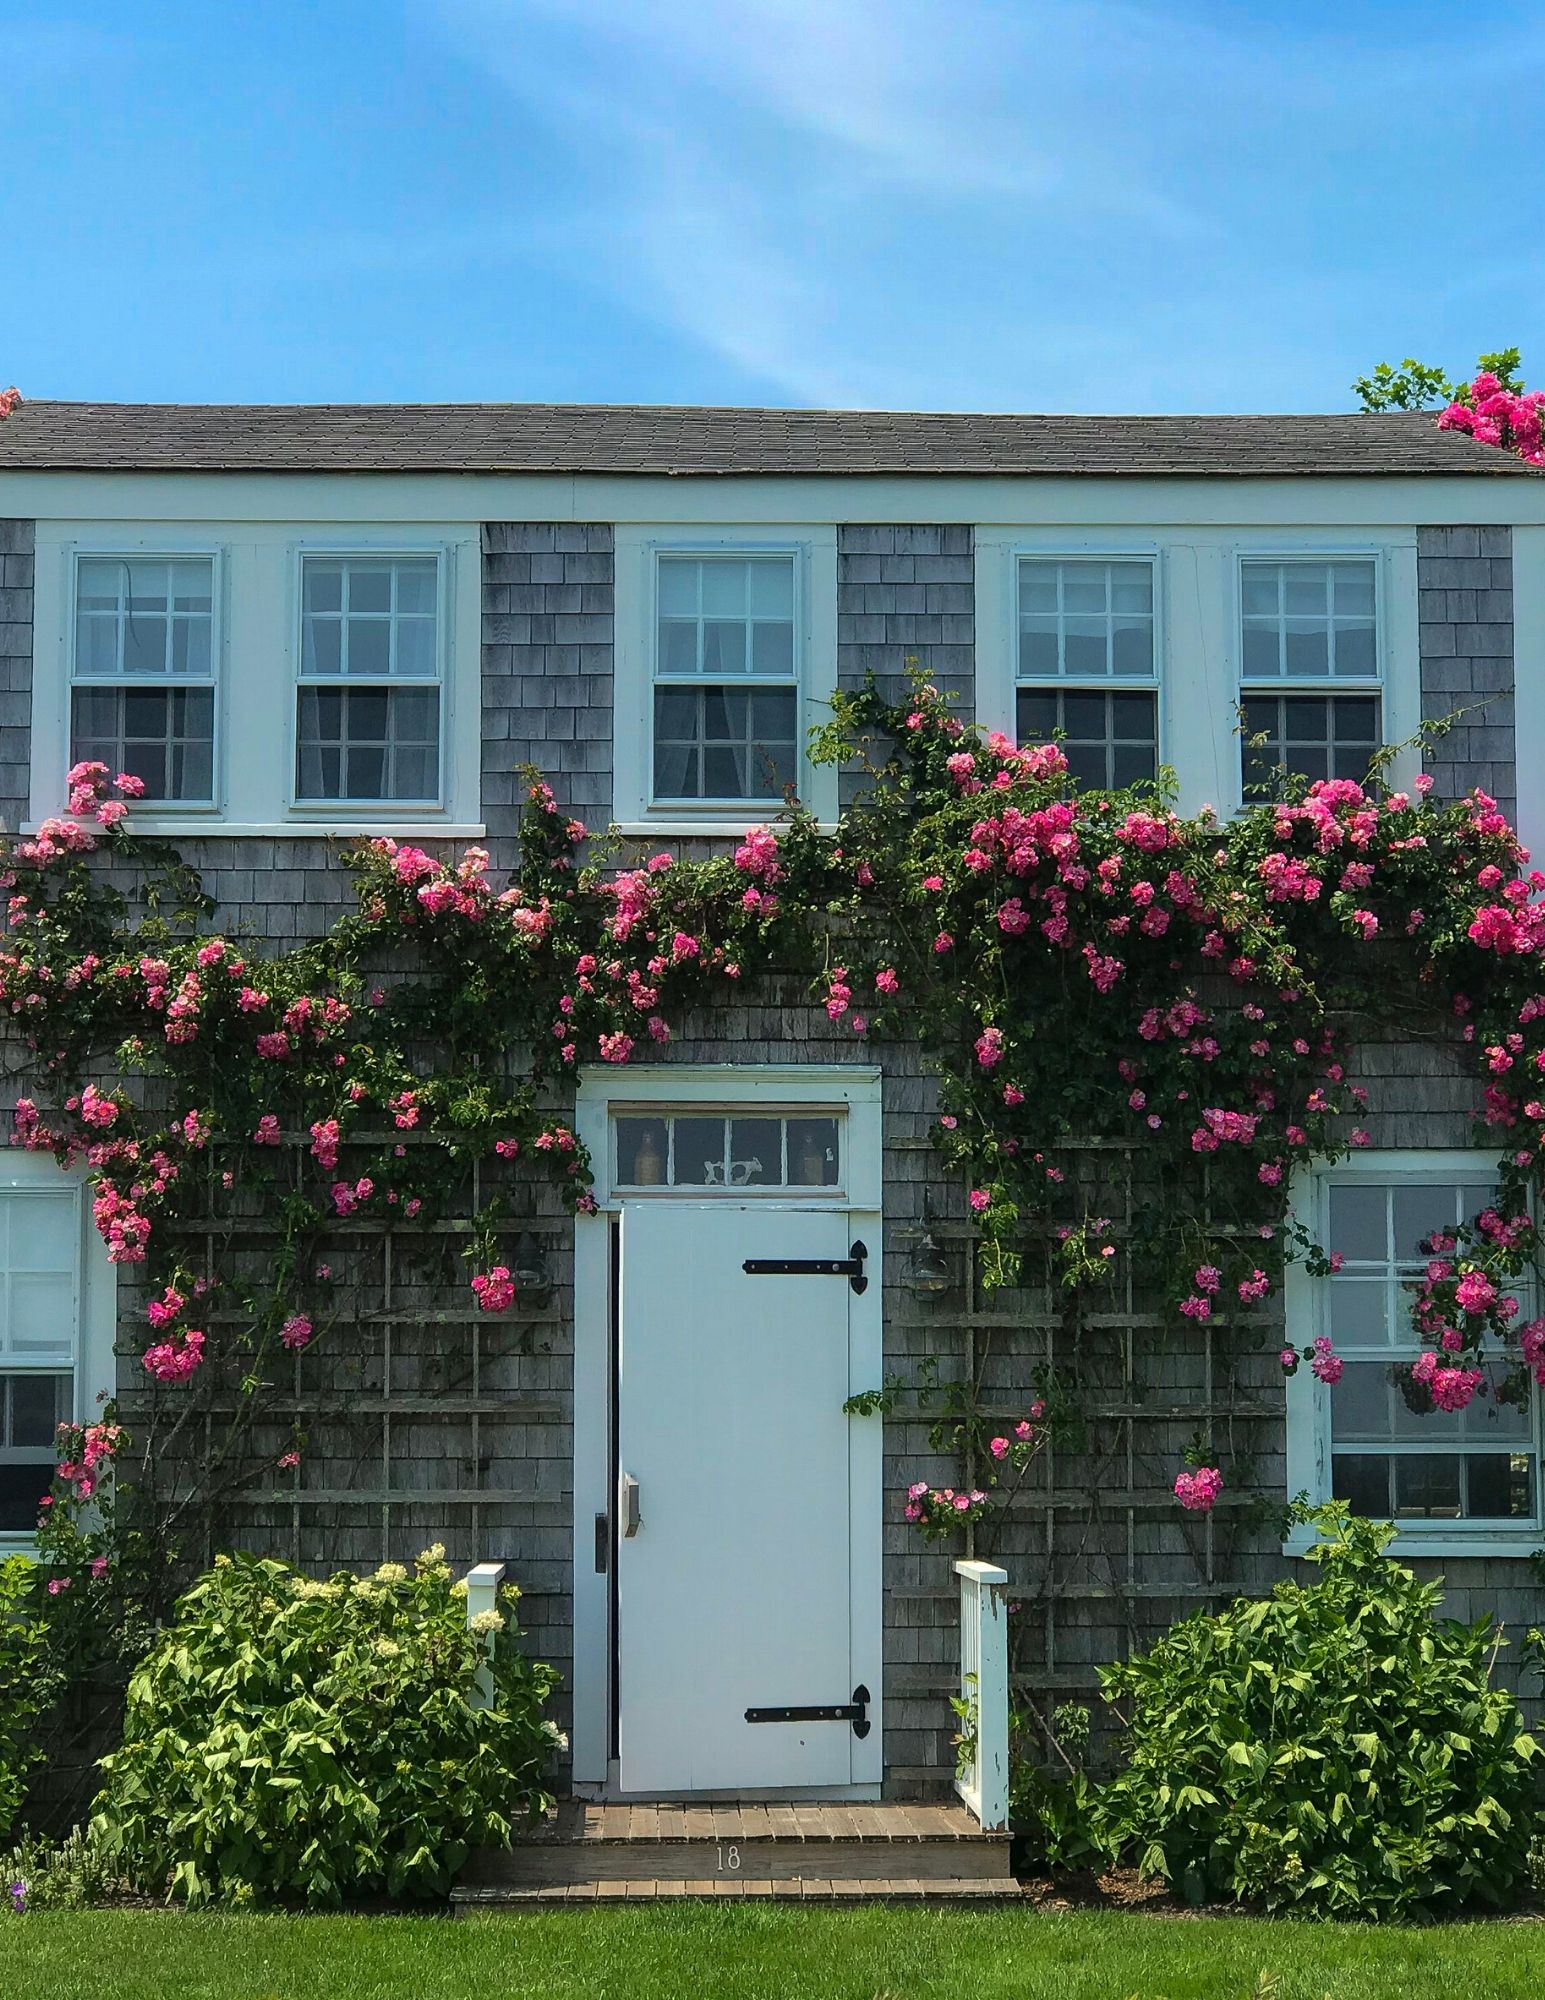 Nantucket Rose Covered Cottages in Sconset-5